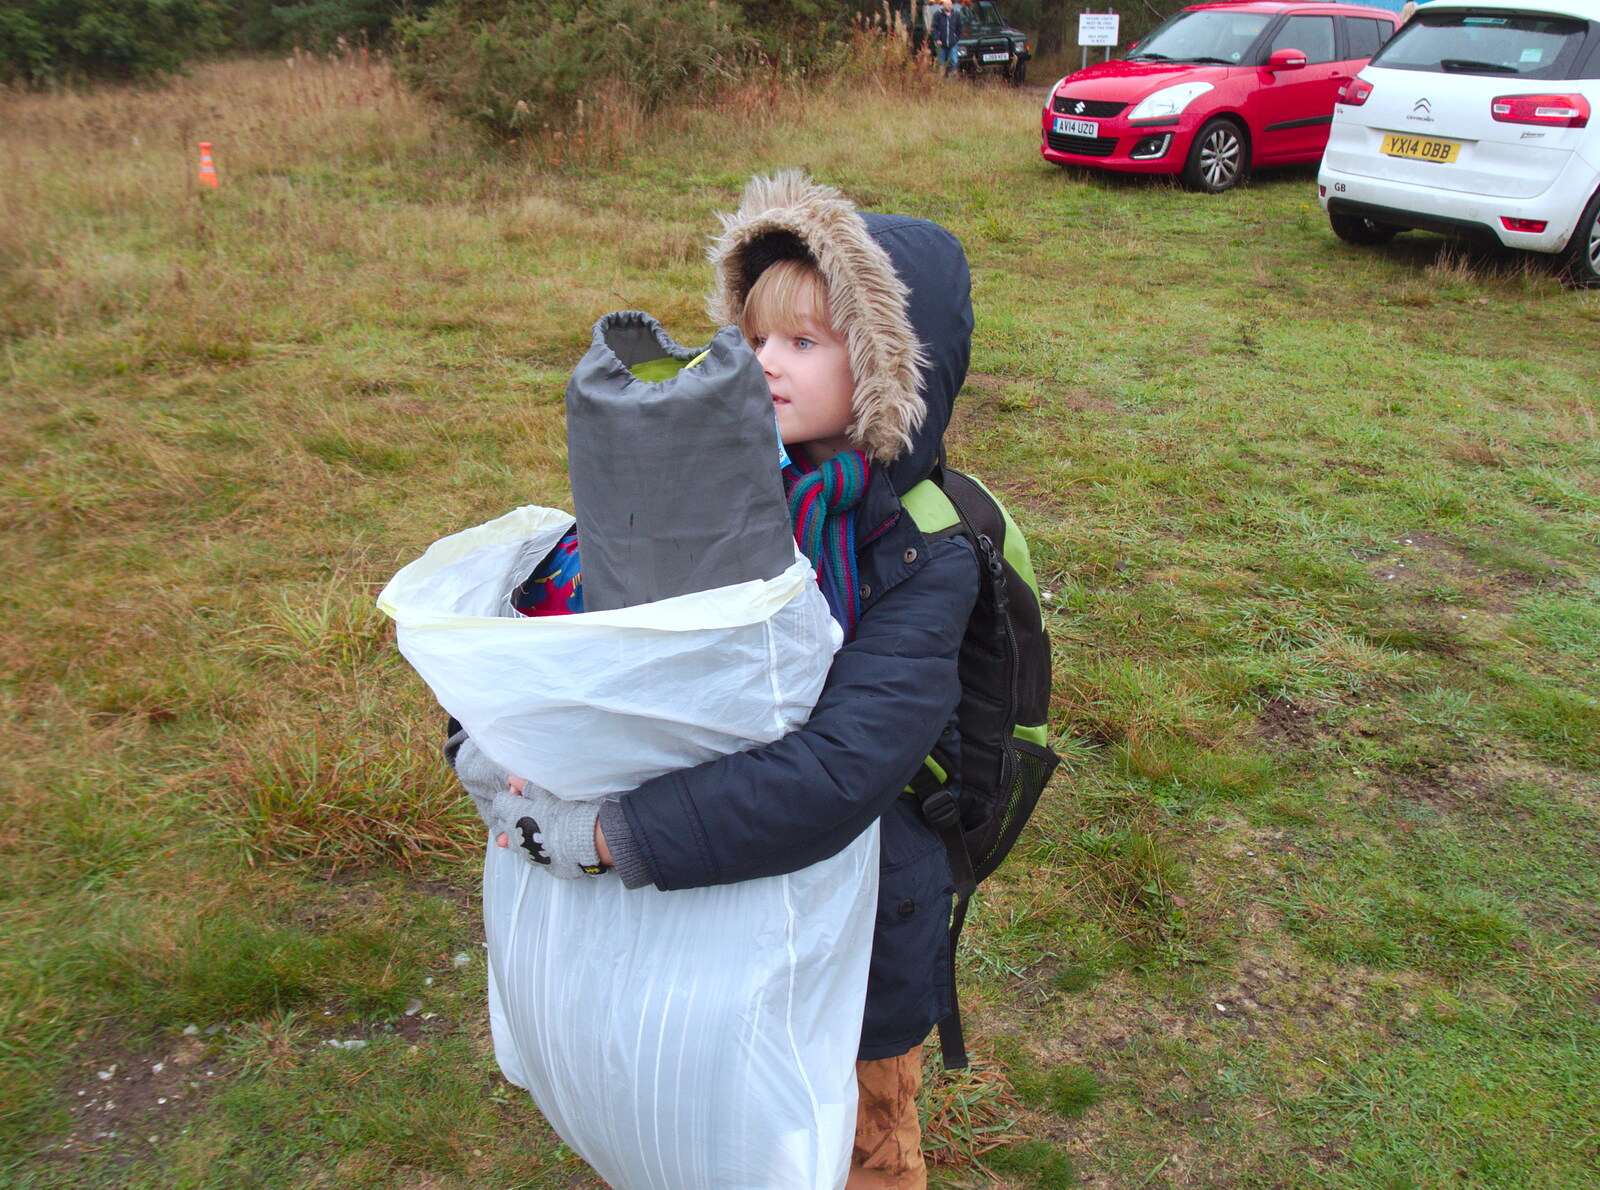 Harry's camping life in a bin liner from The GSB at Stowlangtoft, Beavers, and More XR Rebellions, Suffolk, Norfolk and London - 16th October 2019